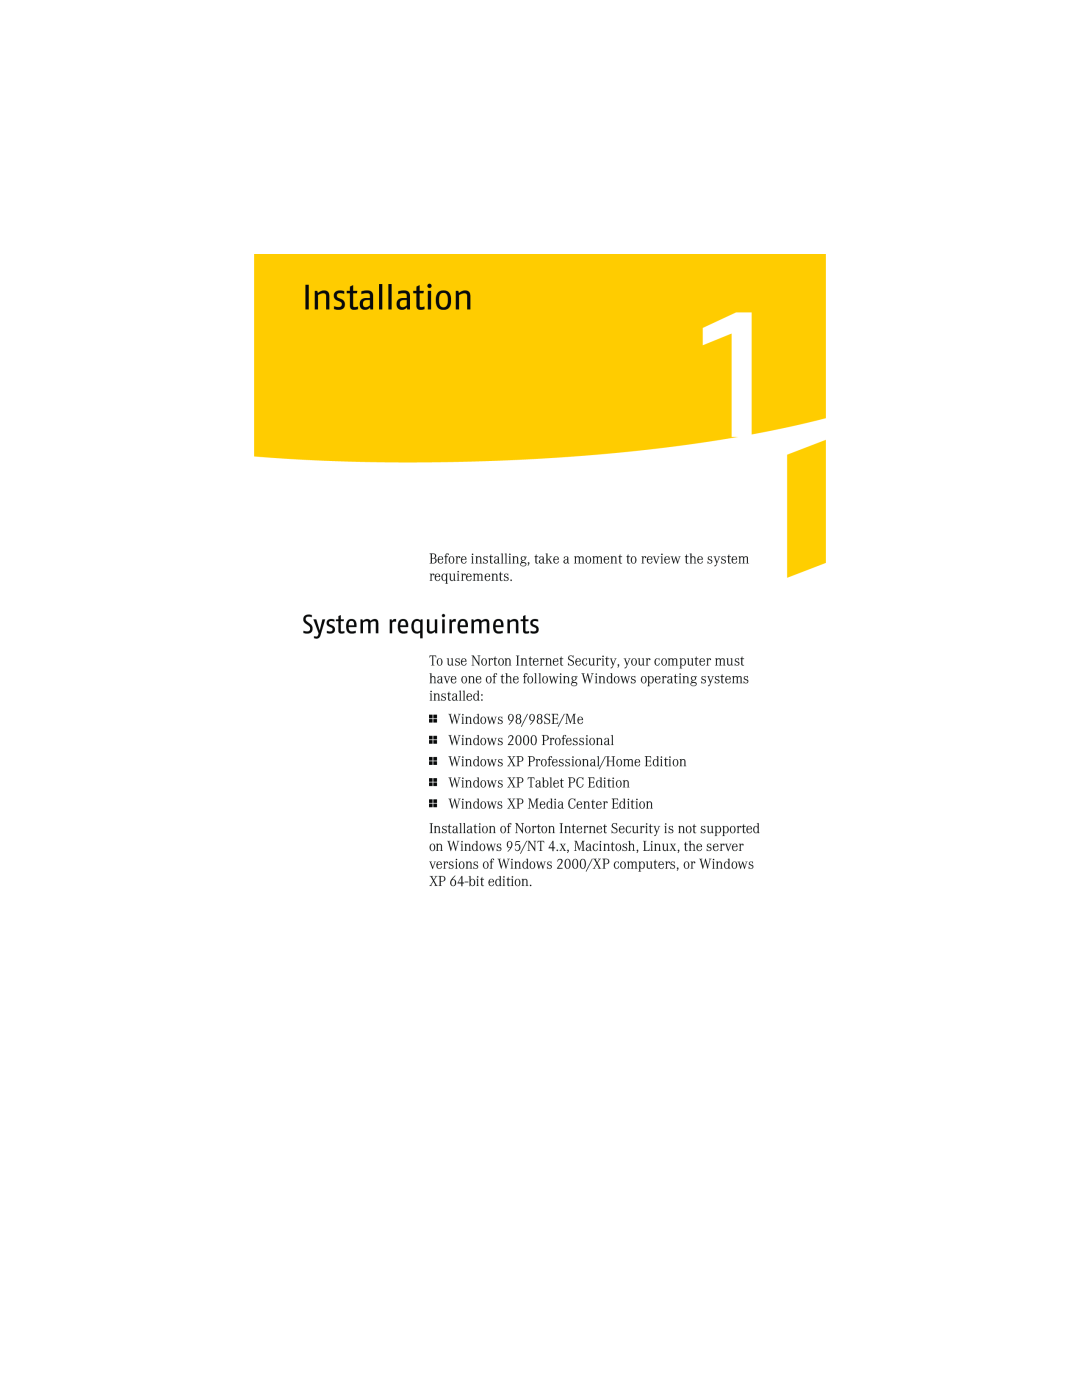 Symantec NIS2005 manual Installation1, System requirements 